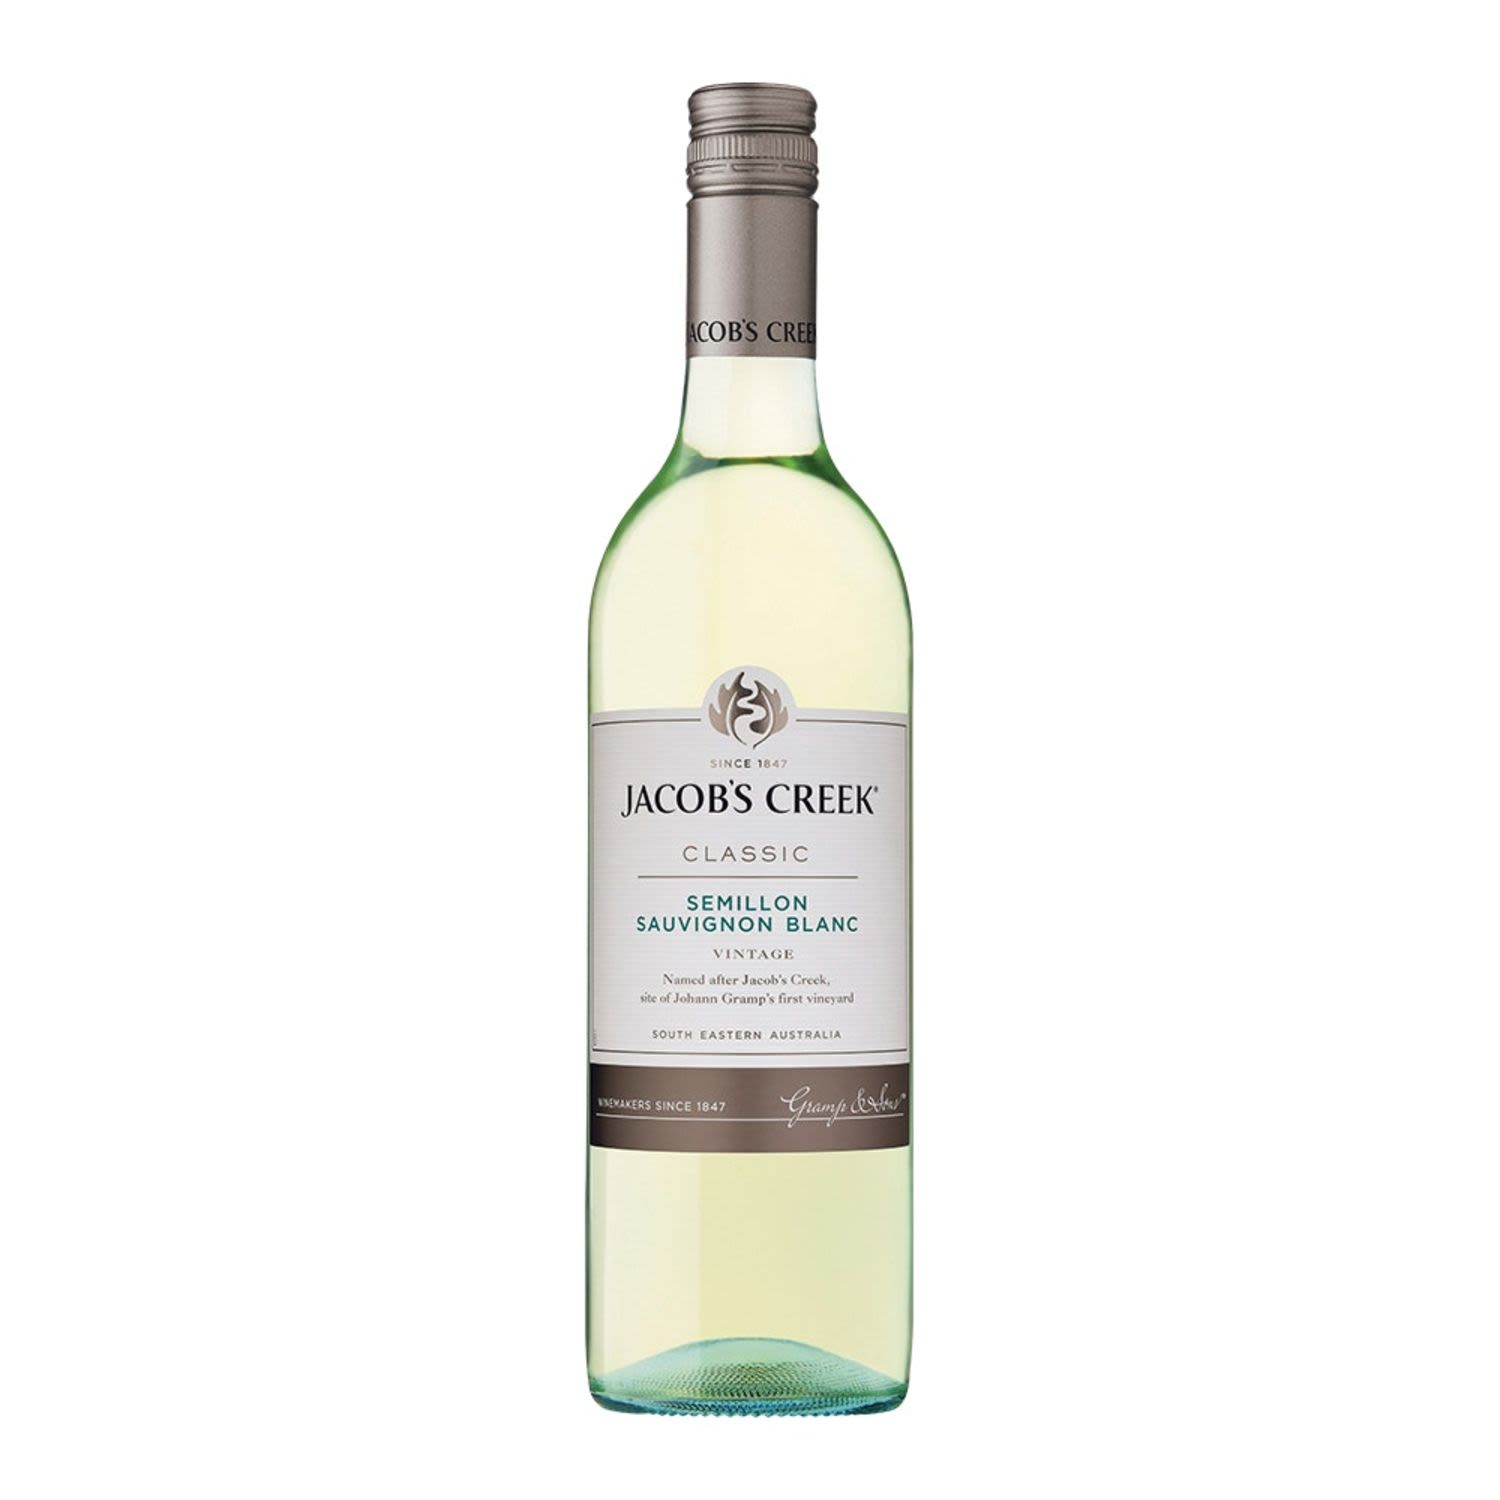 A classic Australian blend, with balanced fruit flavours from the Sauvignon Blanc and refreshing, gentle acidity from the Semillon.<br /> <br />Alcohol Volume: 12.50%<br /><br />Pack Format: Bottle<br /><br />Standard Drinks: 7.7</br /><br />Pack Type: Bottle<br /><br />Country of Origin: Australia<br /><br />Region: South Eastern Australia<br /><br />Vintage: Vintages Vary<br />